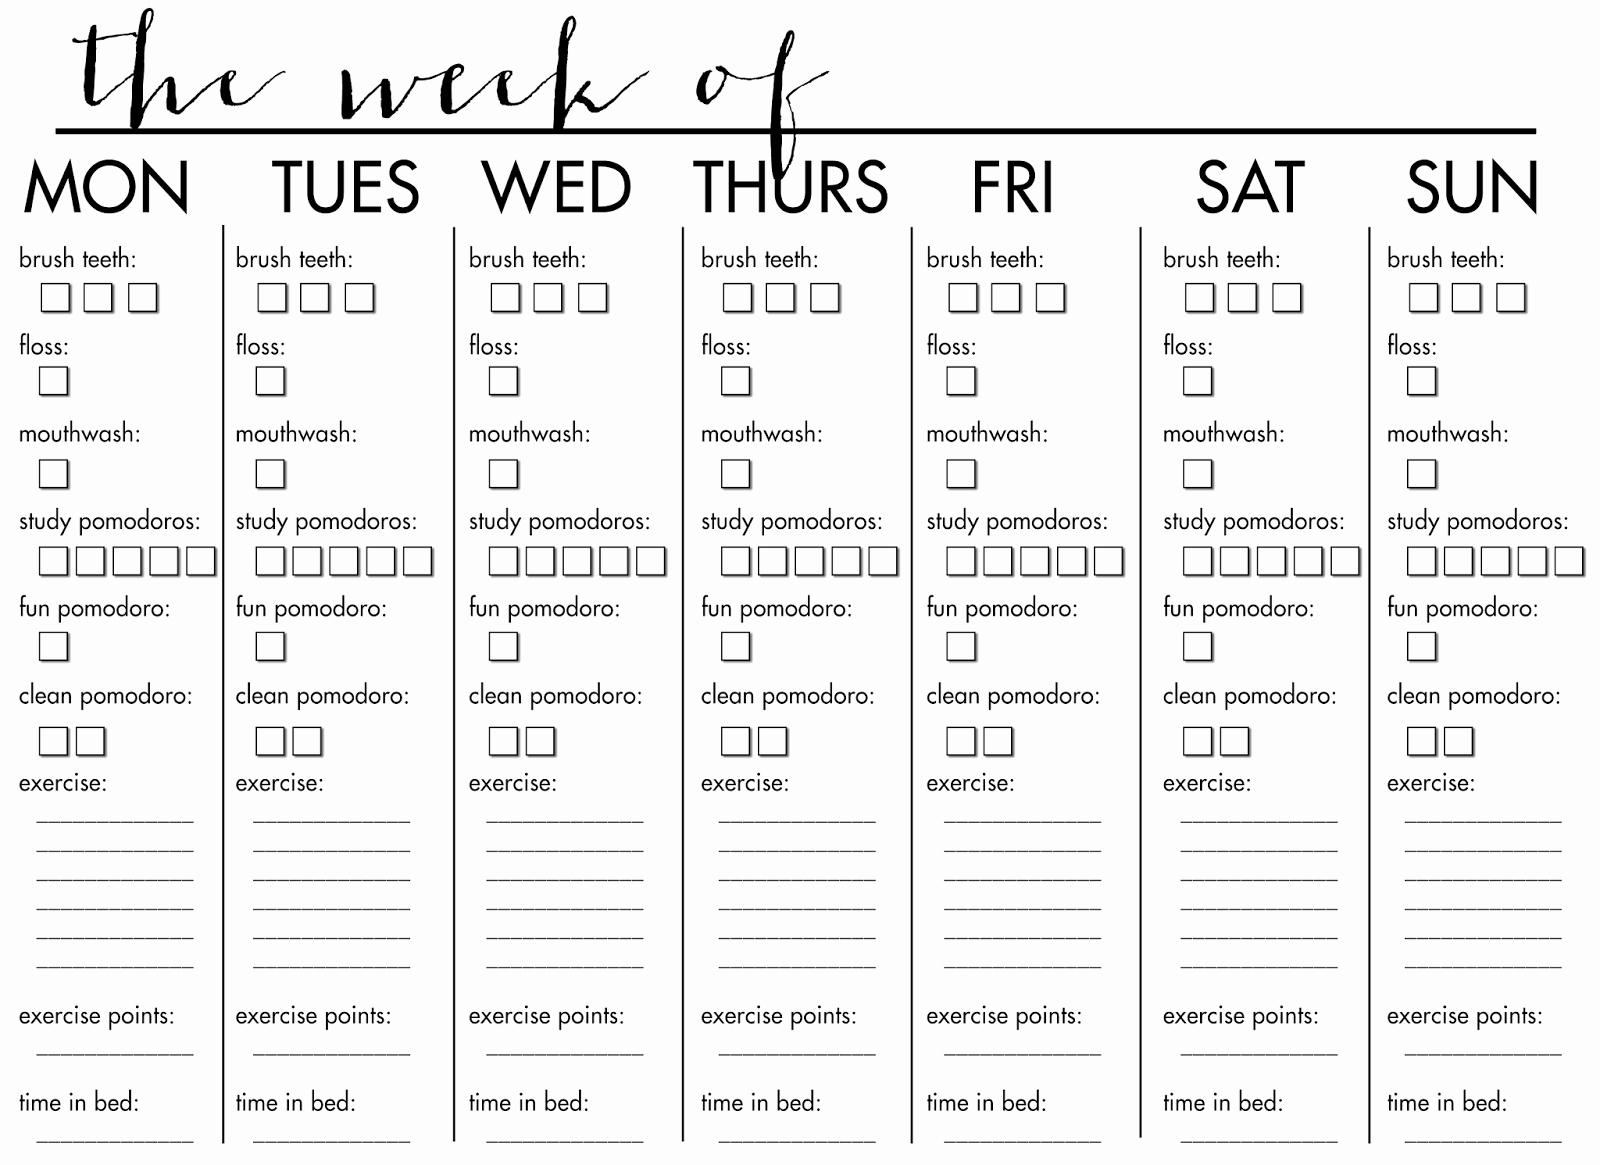 Weekly Workout Schedule Template New Printable Workout Calendar